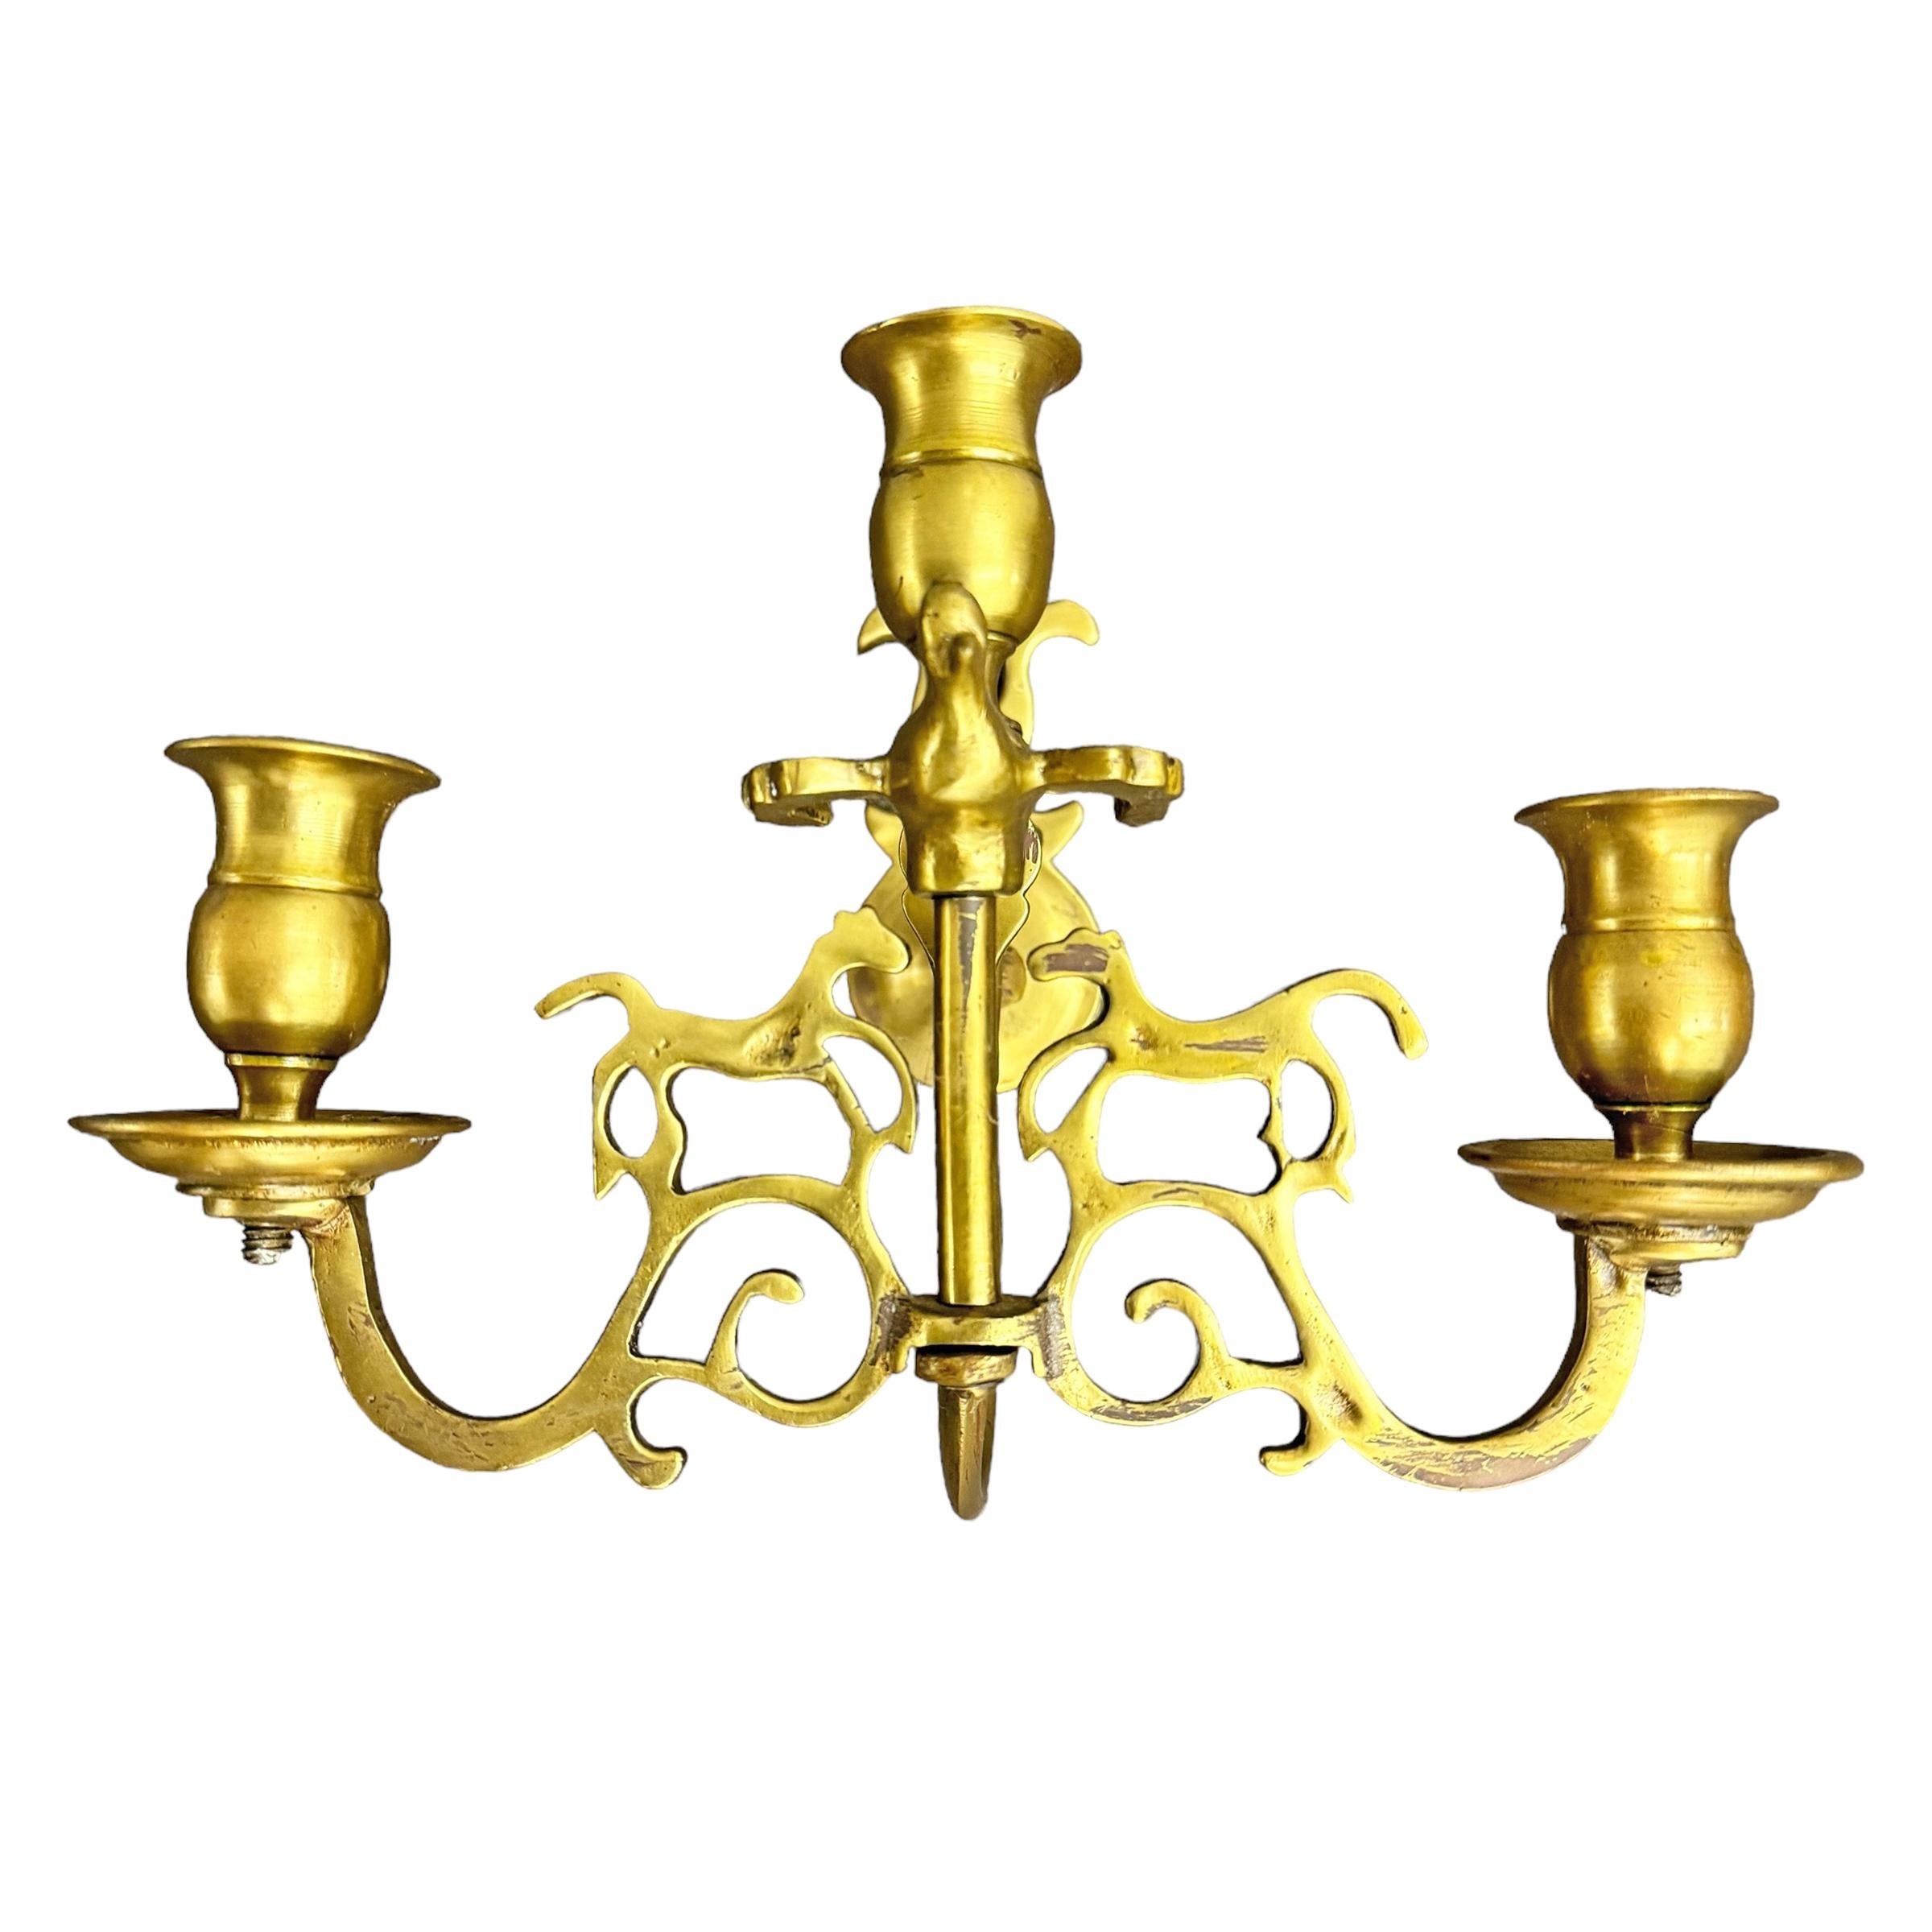 Pair of 18th Century English Georgian Brass Candle Sconces In Good Condition For Sale In Chicago, IL